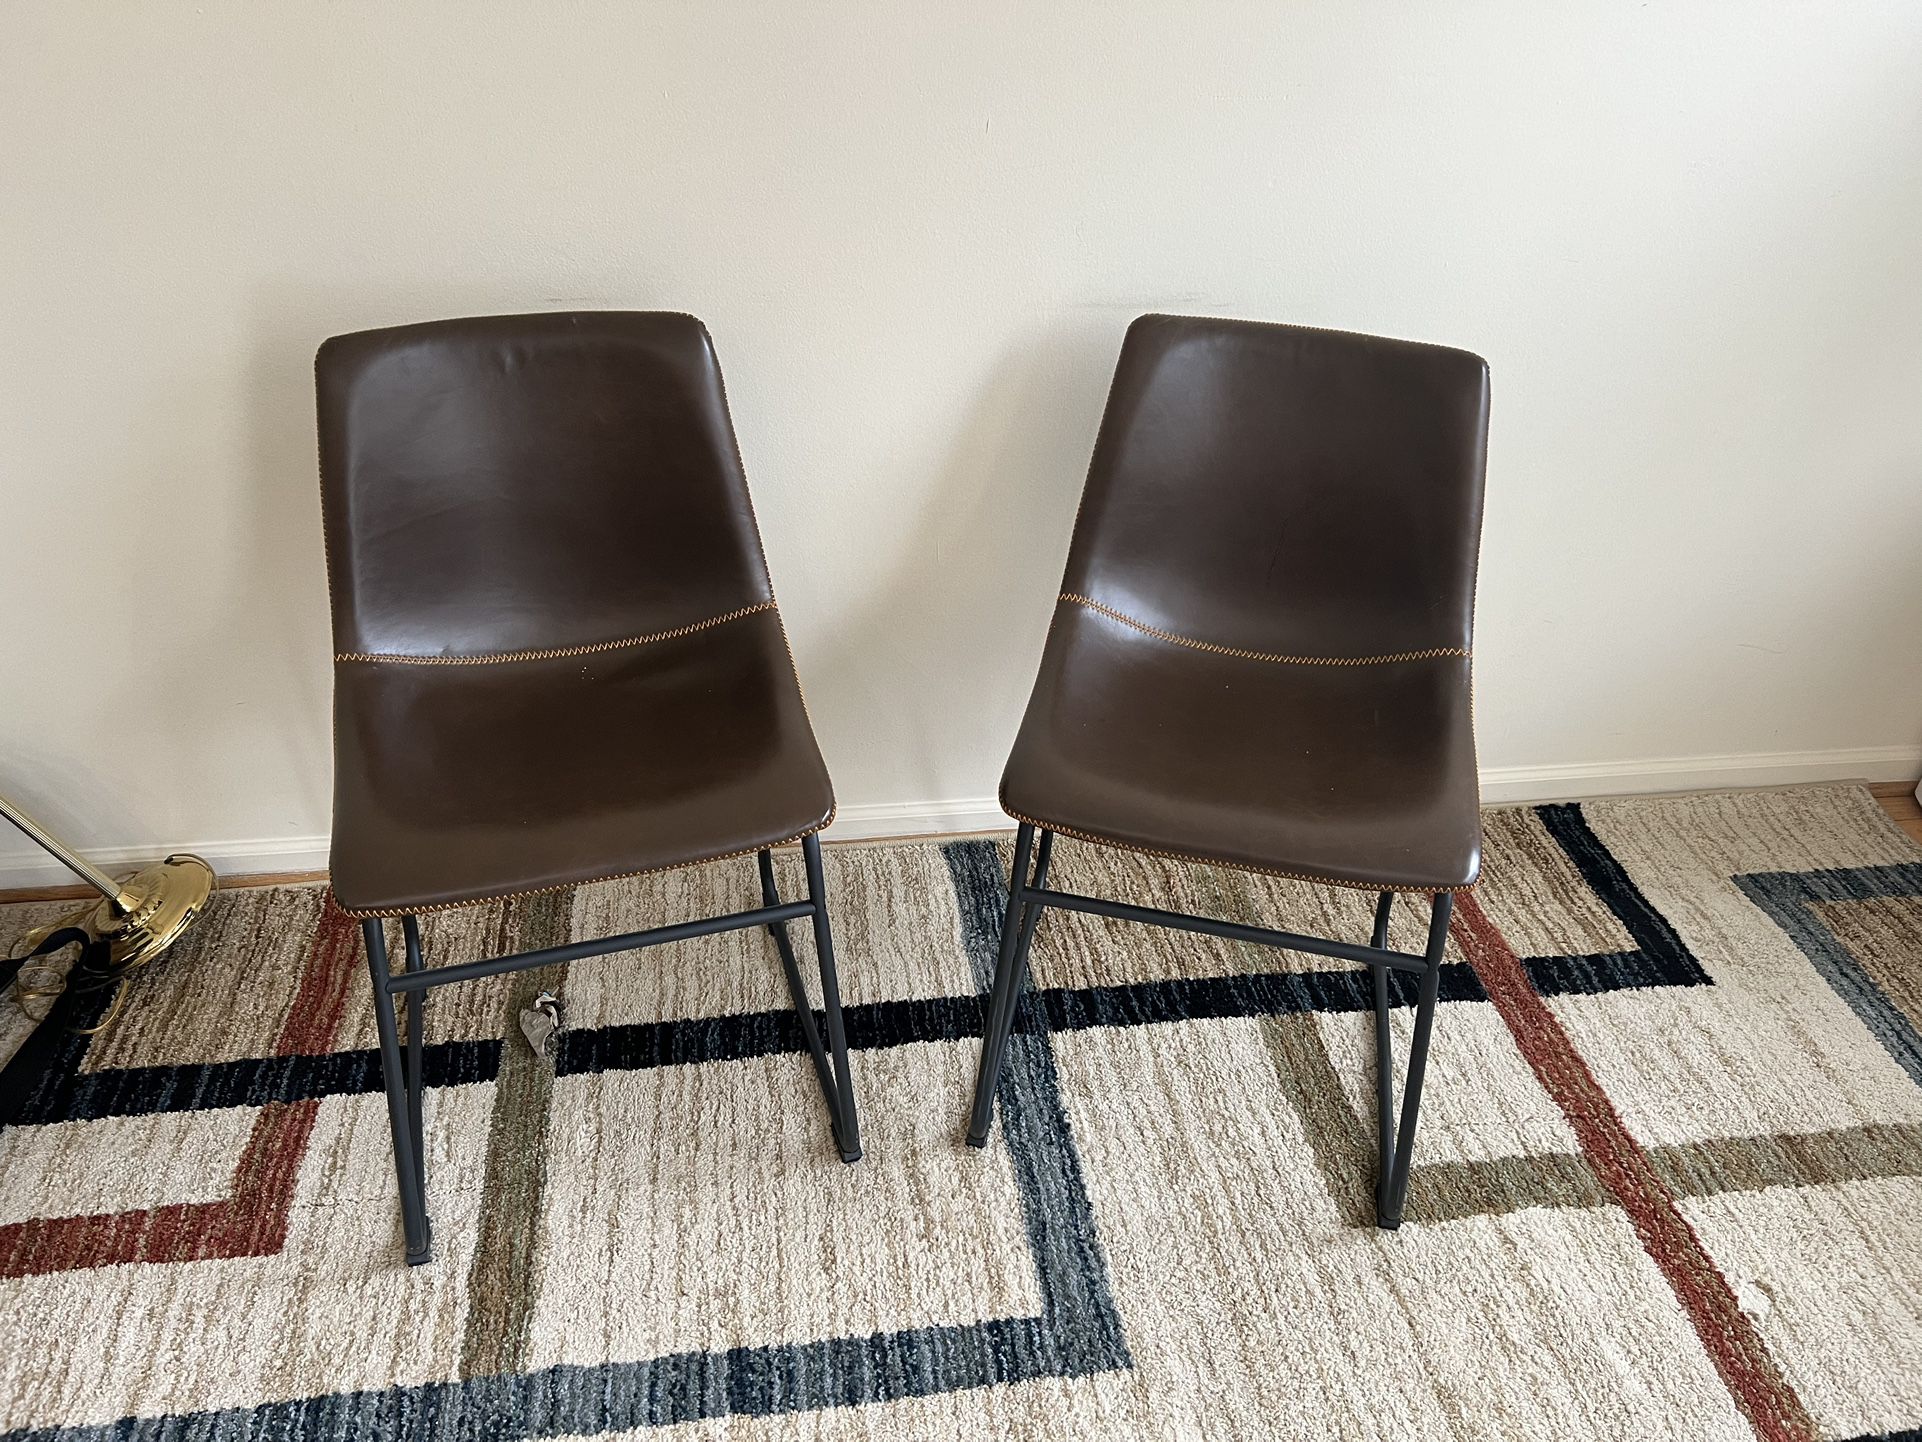 Brown Chairs with Metal Legs - Set of 2